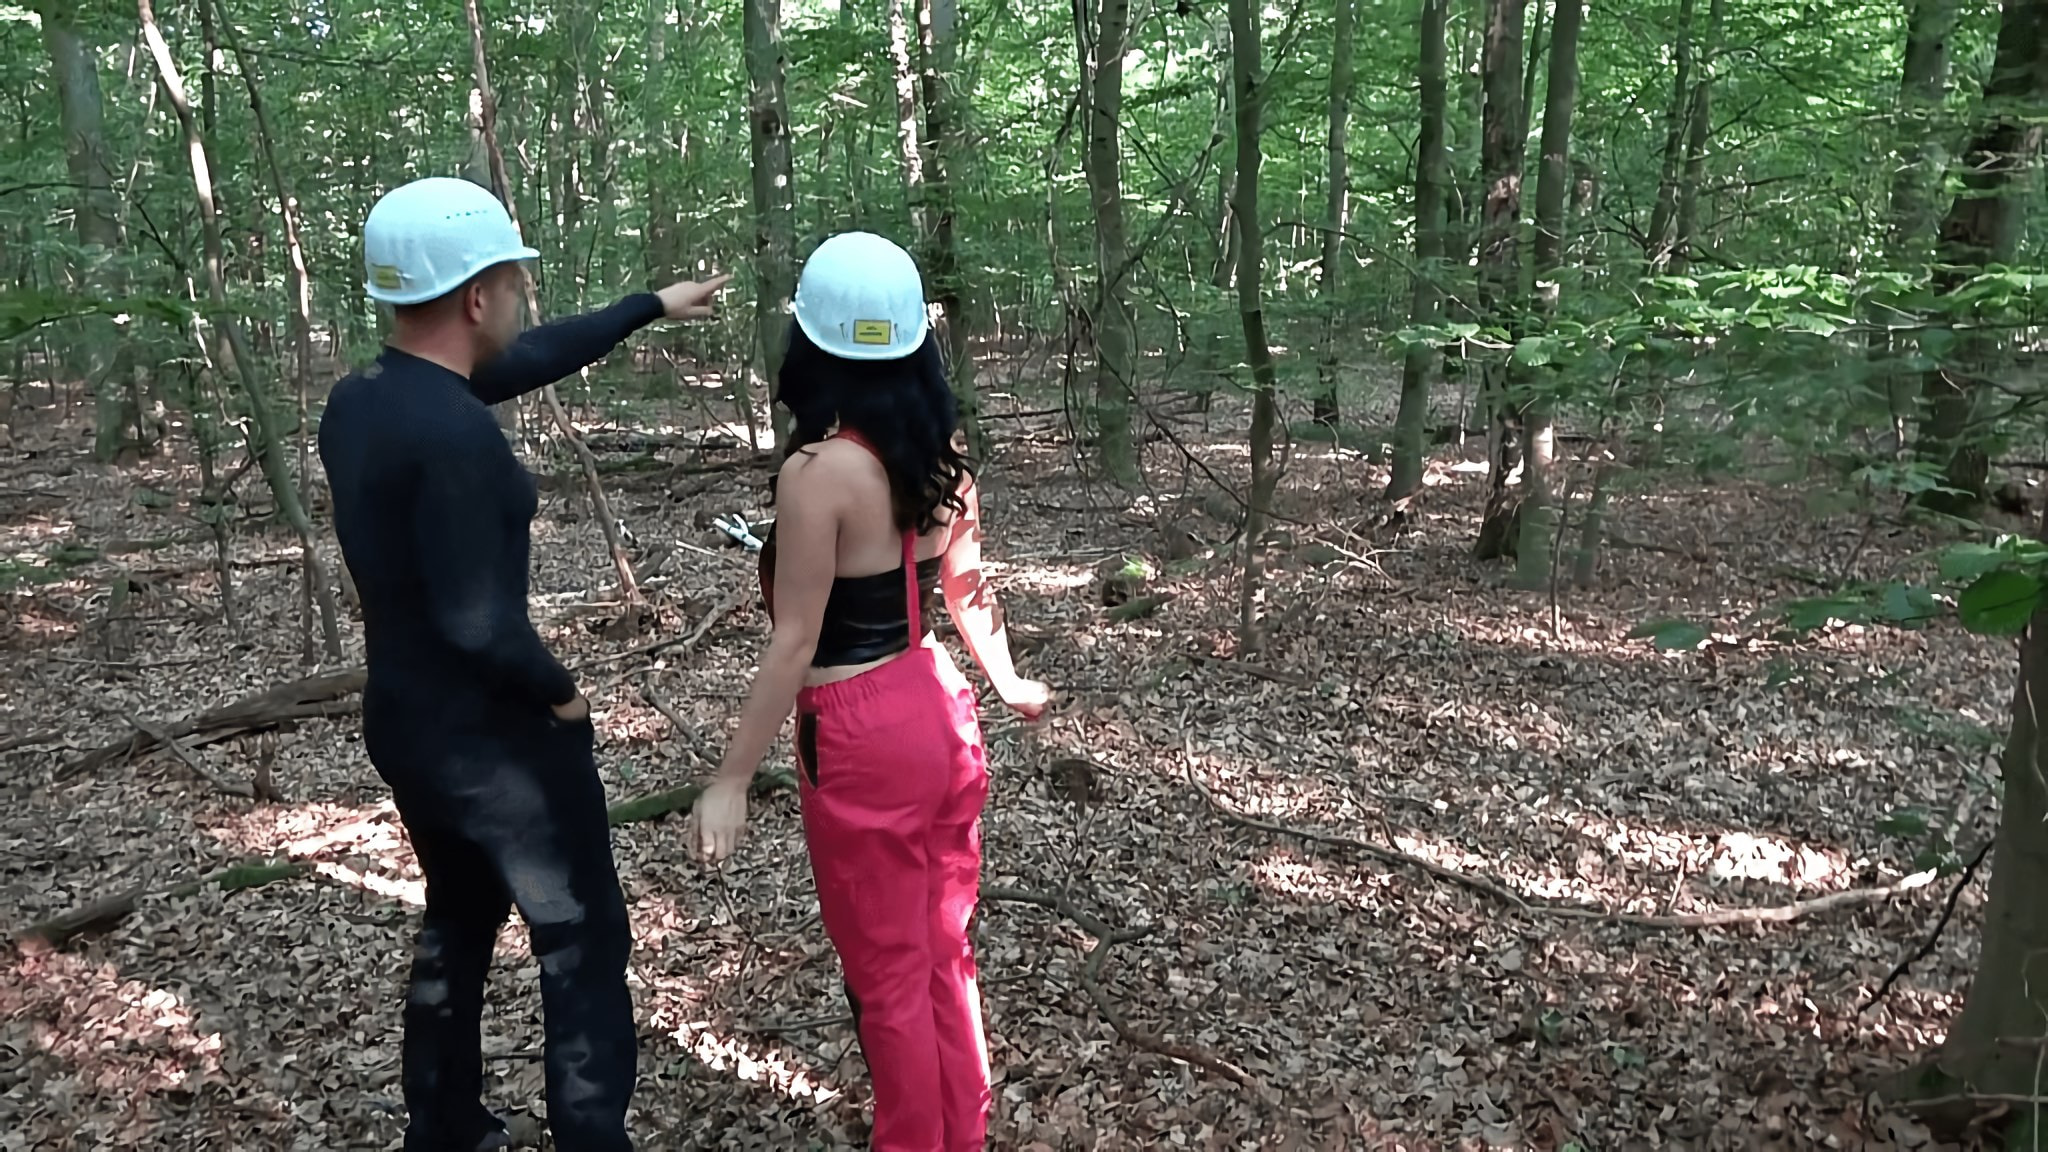 Kink Partners 'Punishment in the forest part 1' starring Lady Blackdiamond (Photo 5)